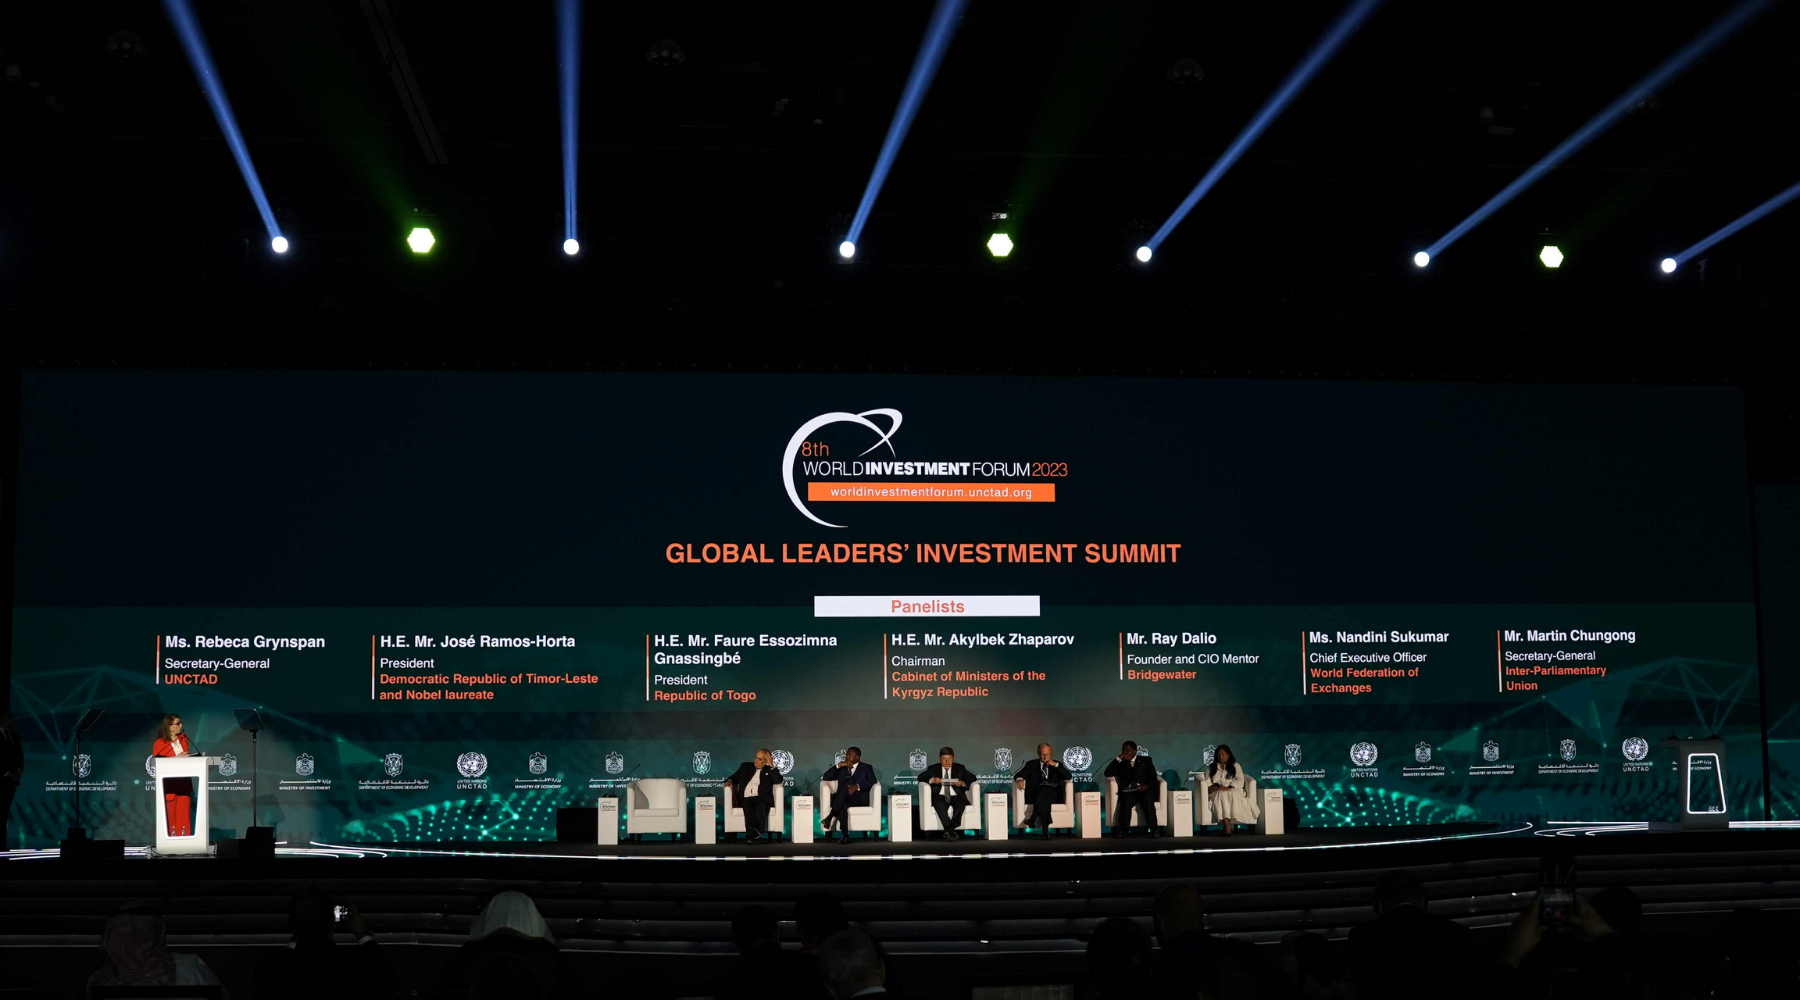 8th Edition of World Investment Forum 2023 Commences in Abu Dhabi